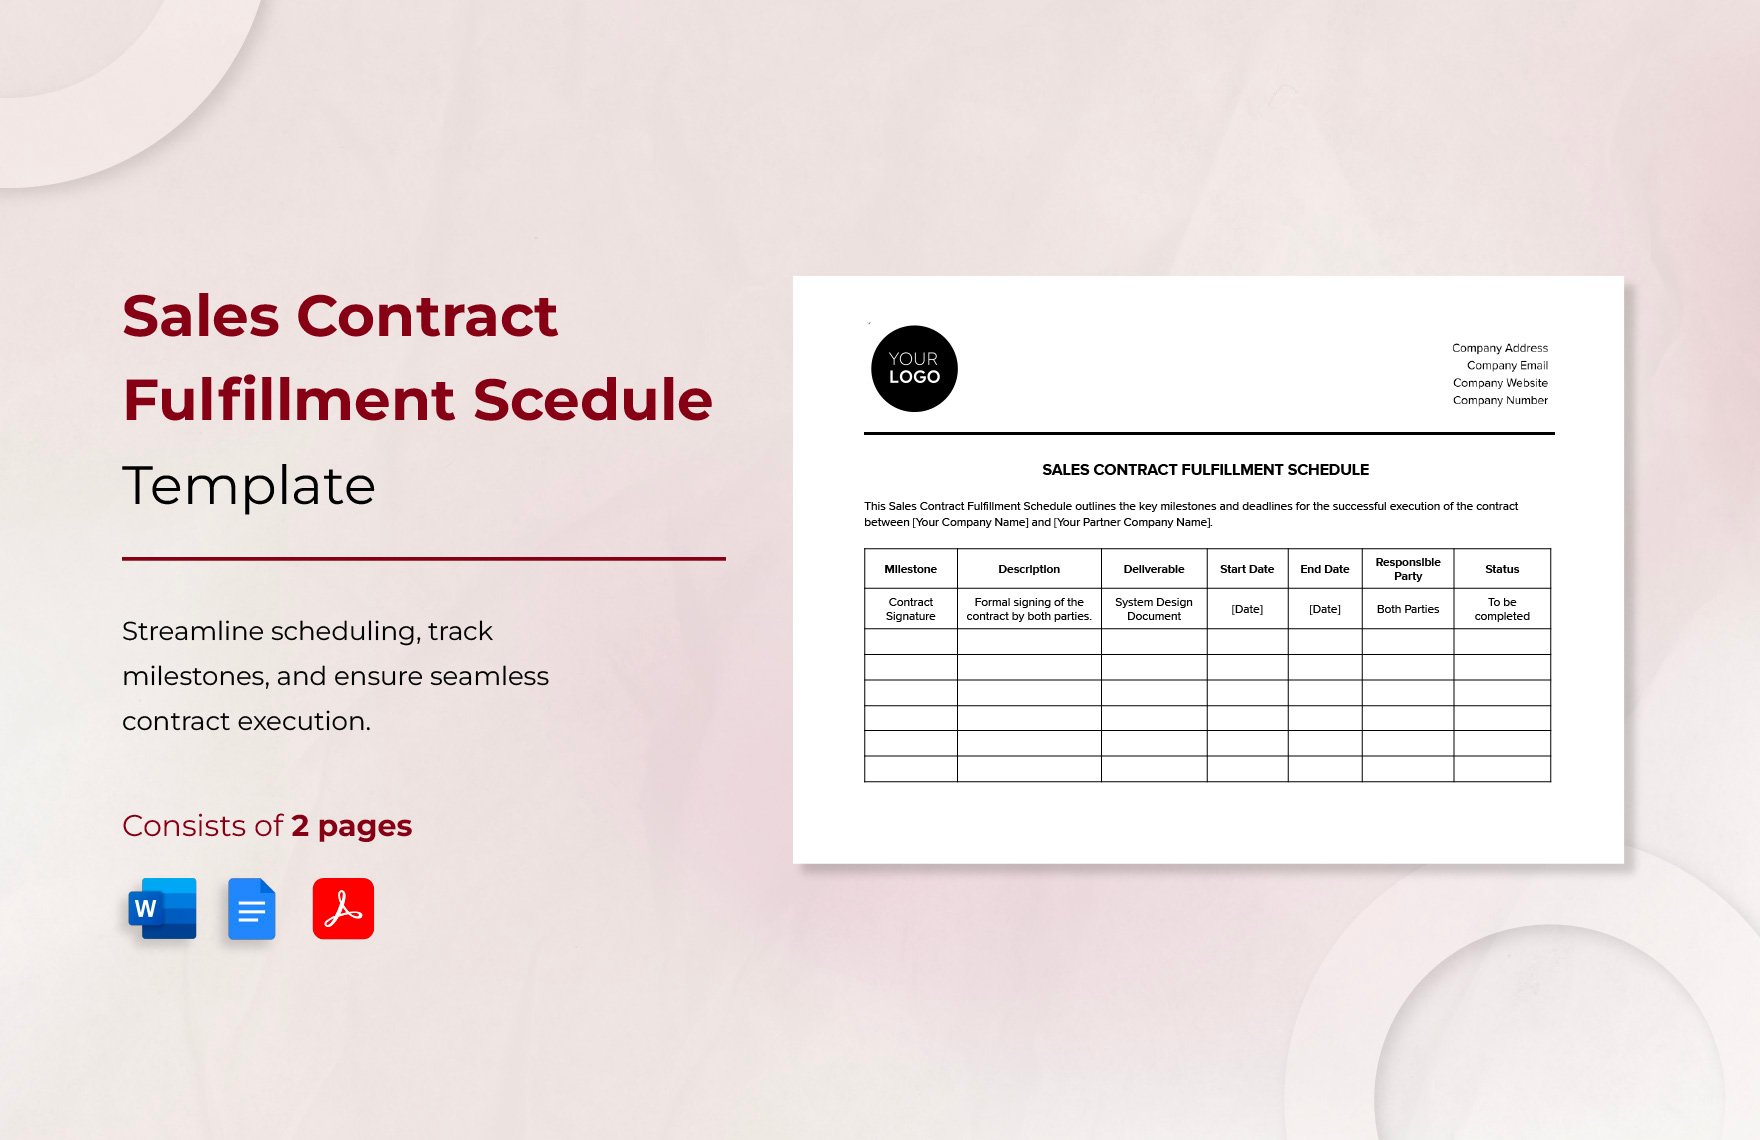 Sales Contract Fulfillment Schedule Template in Word, Google Docs, PDF